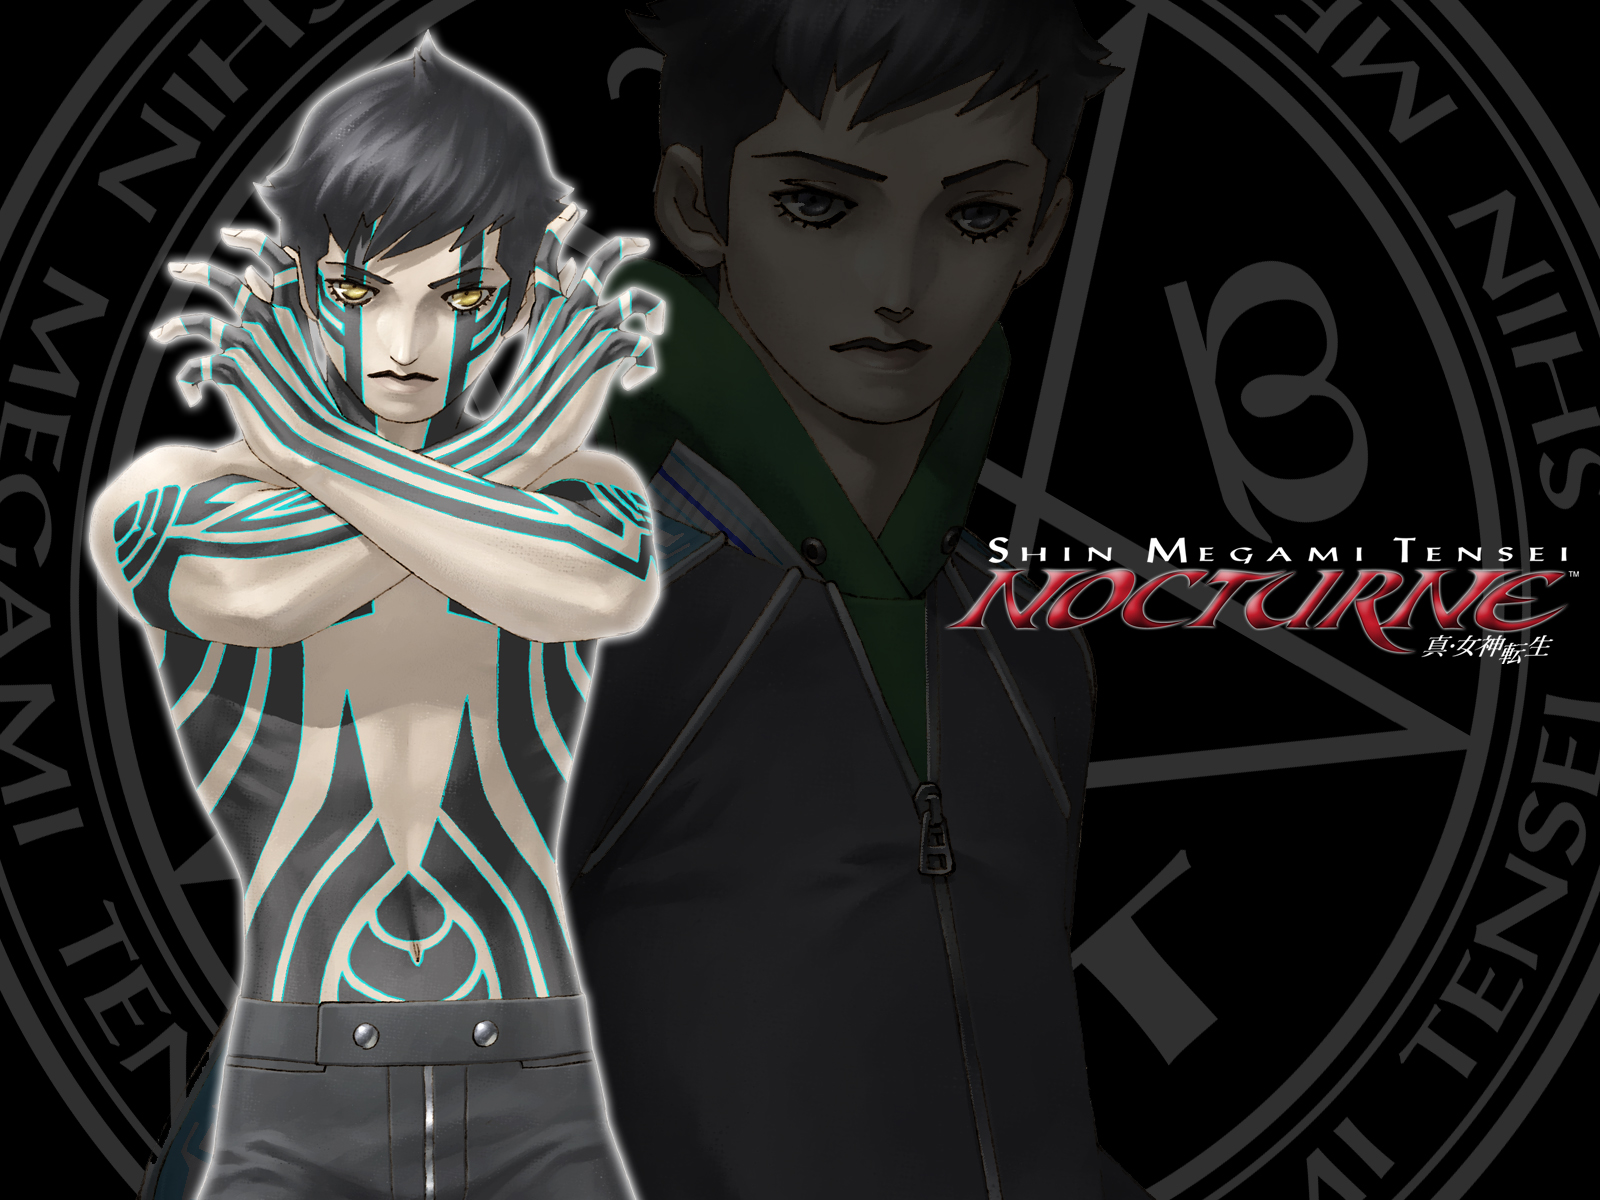 Shin Megami Tensei Nocturne Is Now On Psn As A Ps2 Classic Pictures to